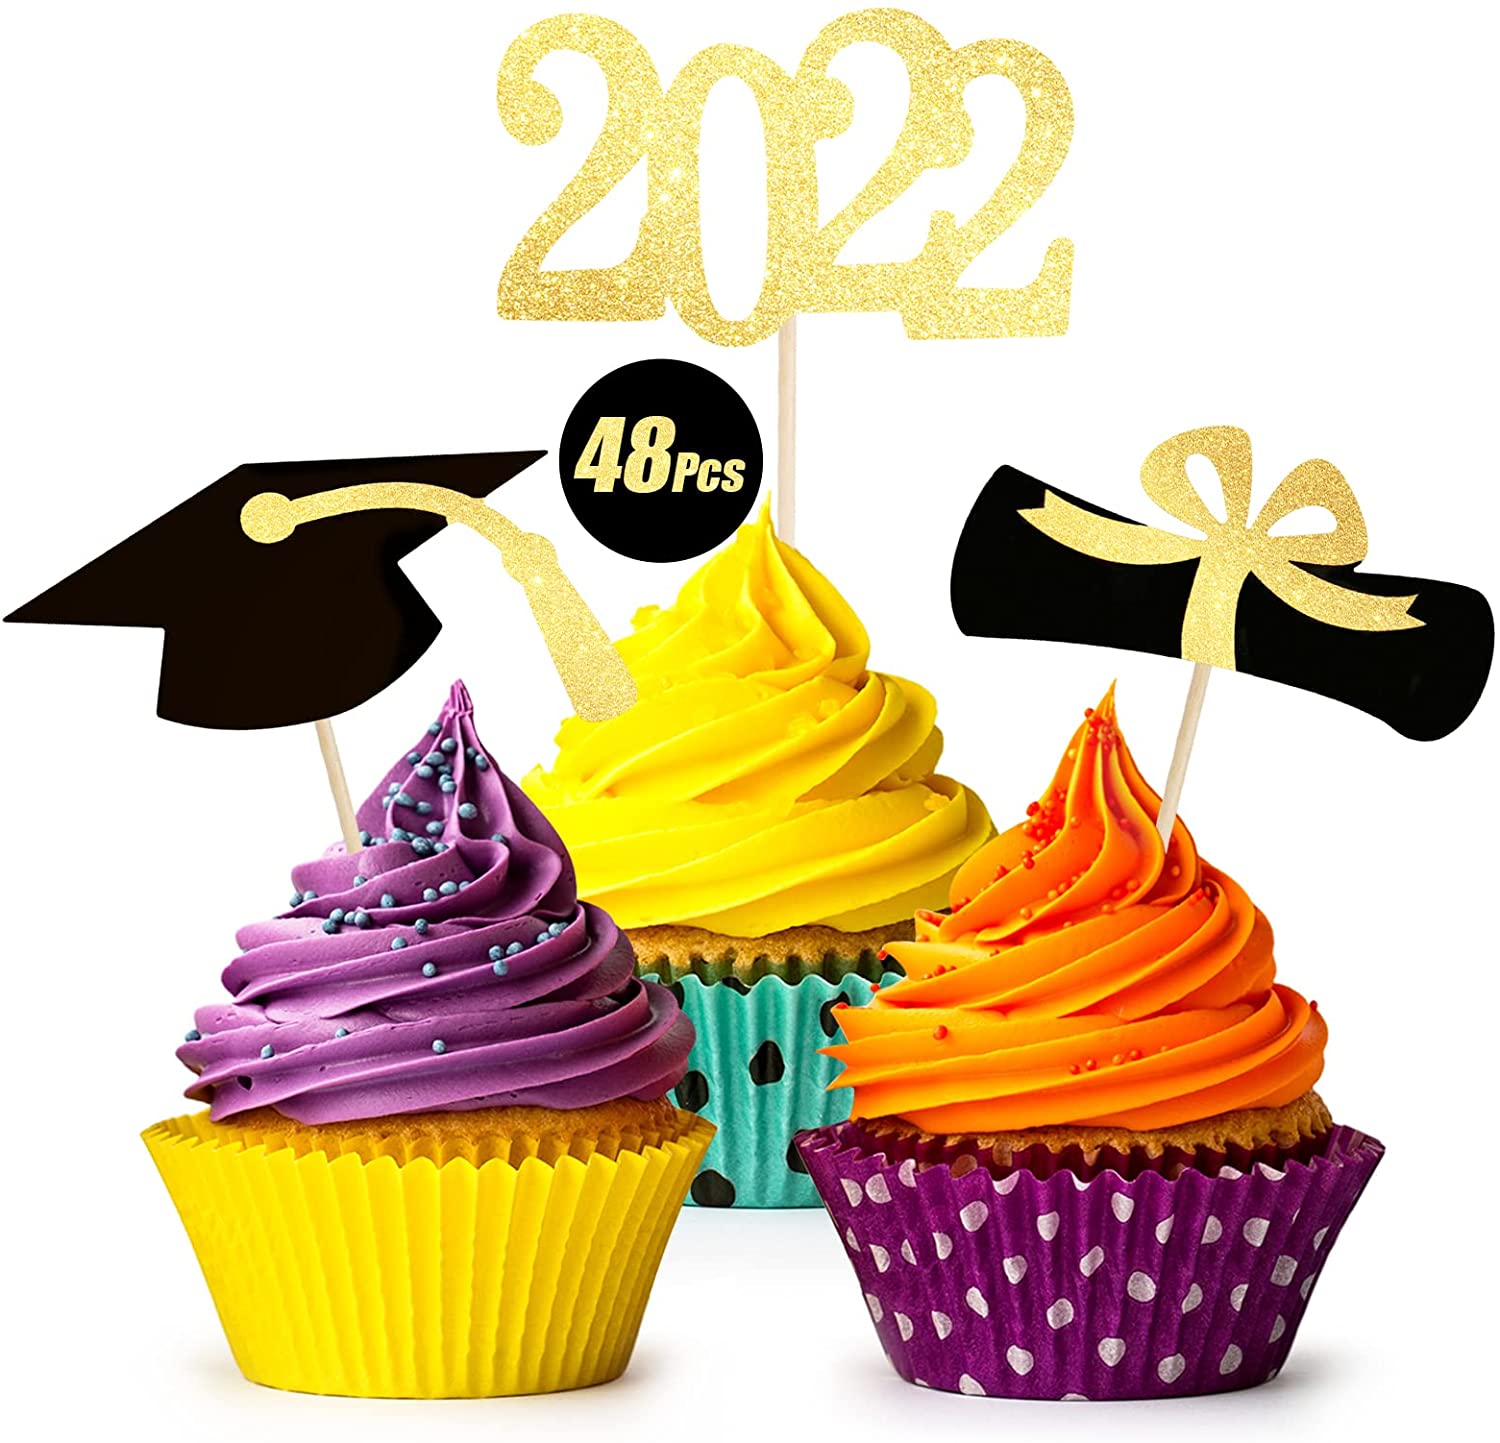 48 PCS Qibote Graduation Cupcake Toppers 2019 Graduation Party Cake Decorations Cupcake Topper Picks Class of 2019 Graduation Party Supplies 